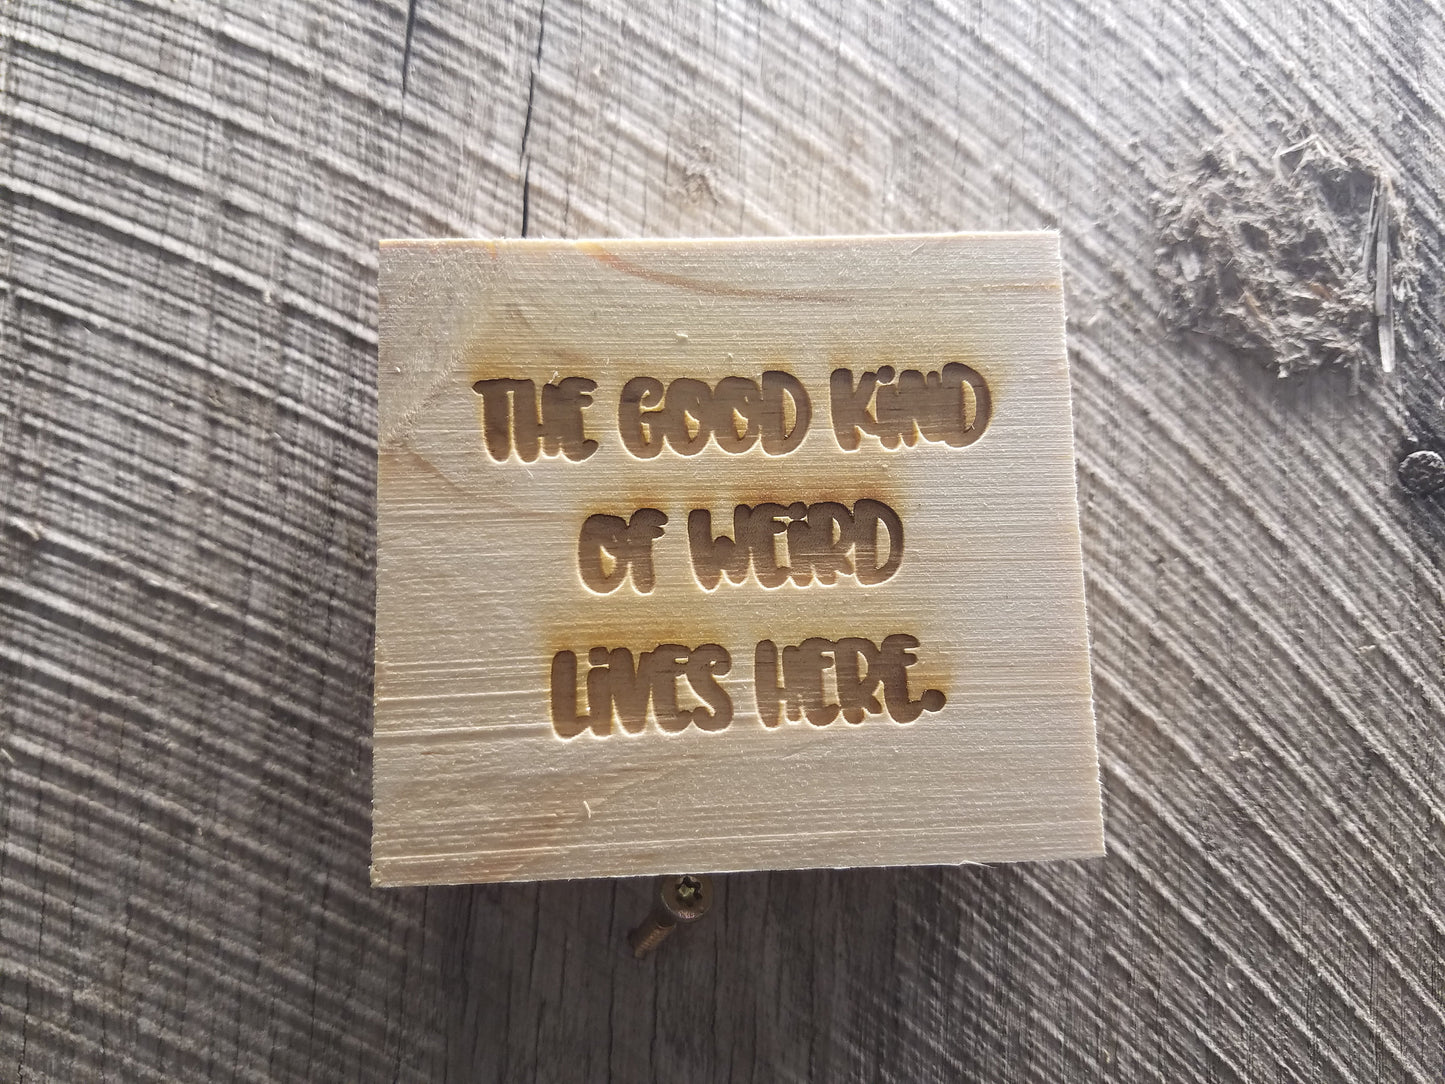 The Good Kind of Weird Lives Here, Weird, Fun, Crazy, Home, Decor, Engraved, Wood, Block, Rustic, Pine, Tiered Tray, Primitive, Self Sitter